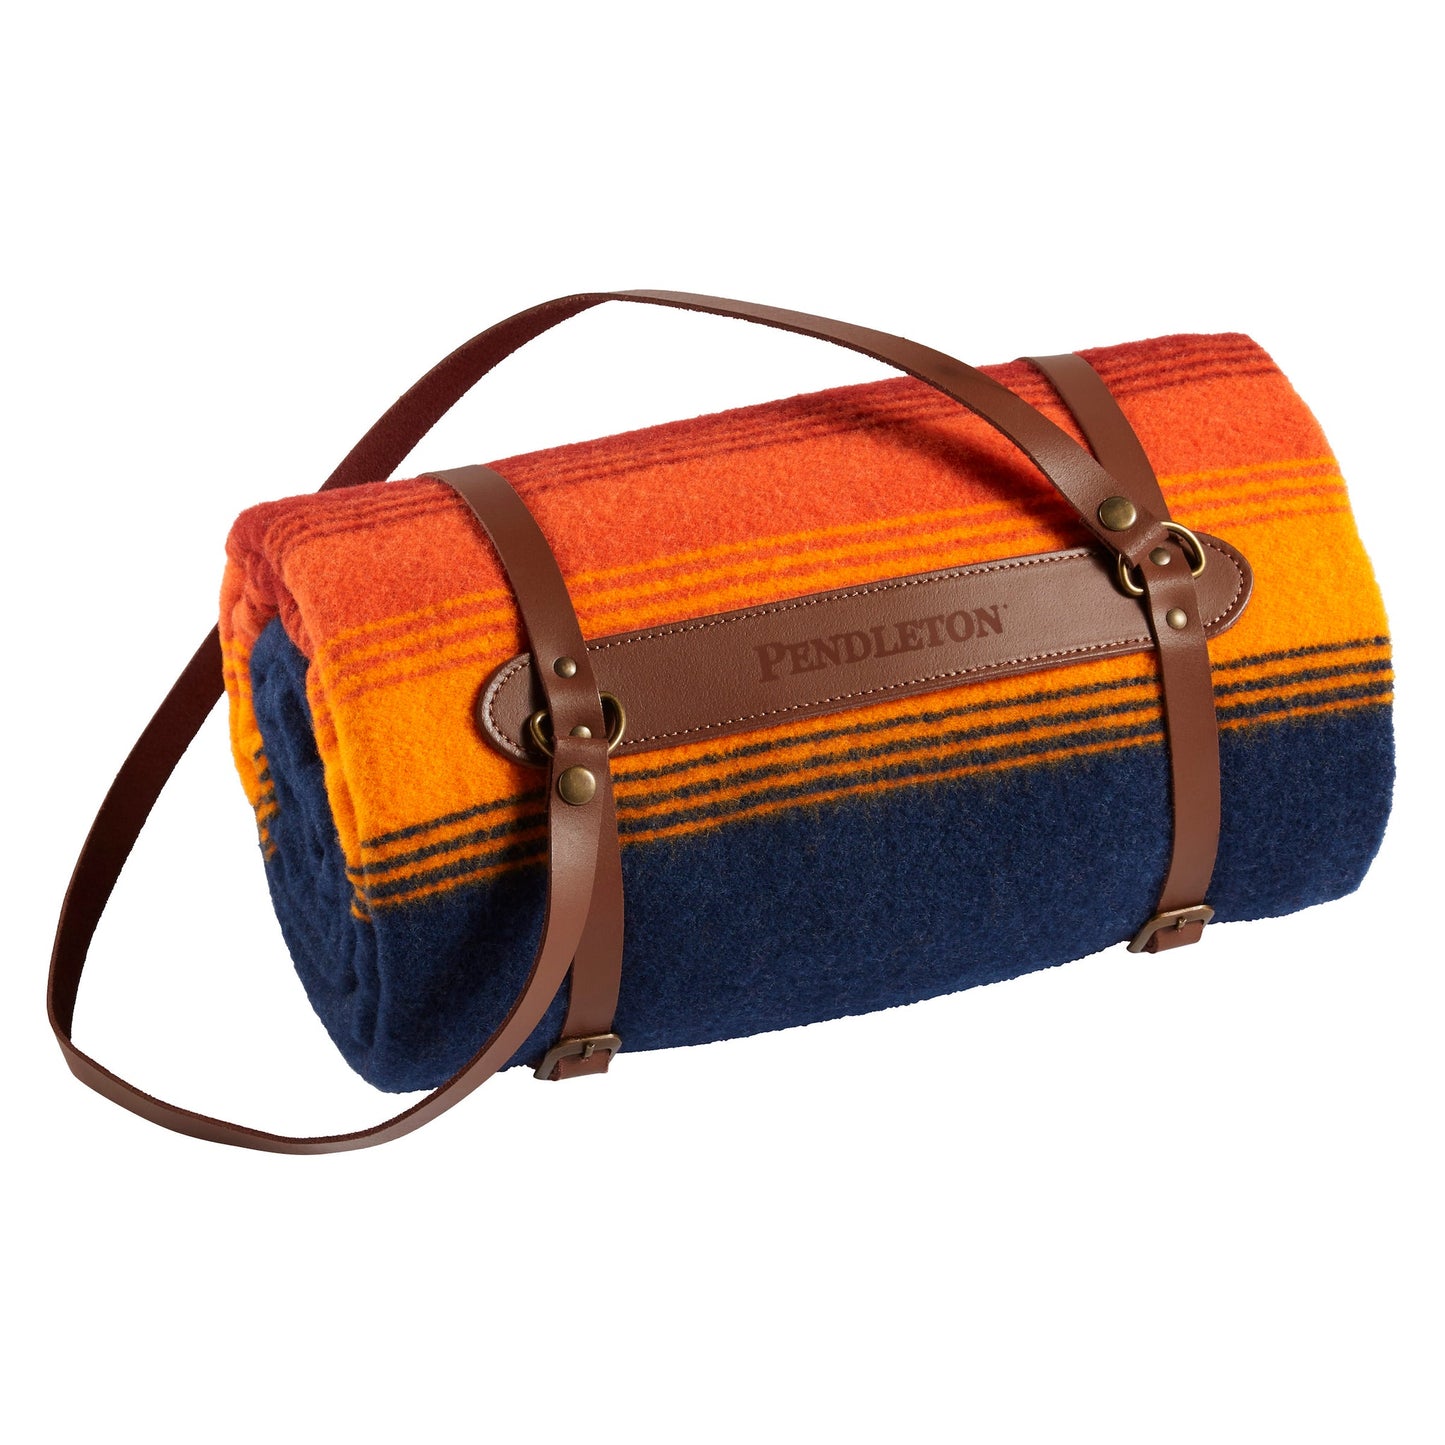 Pendleton National Park Throw With Carrier